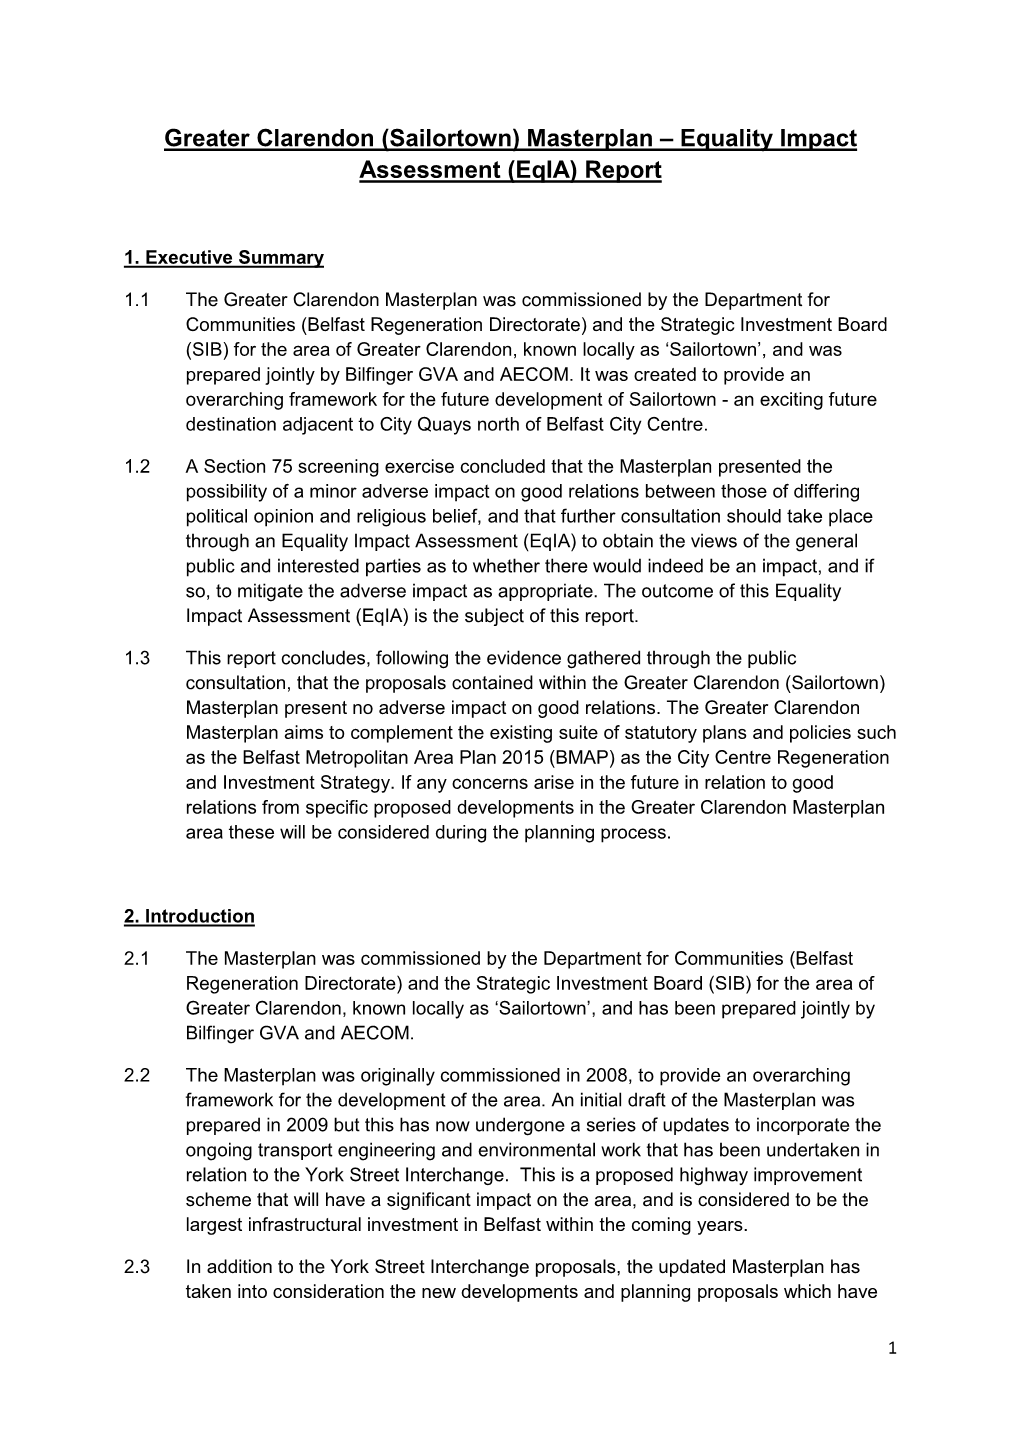 Greater Clarendon (Sailortown) Masterplan – Equality Impact Assessment (Eqia) Report